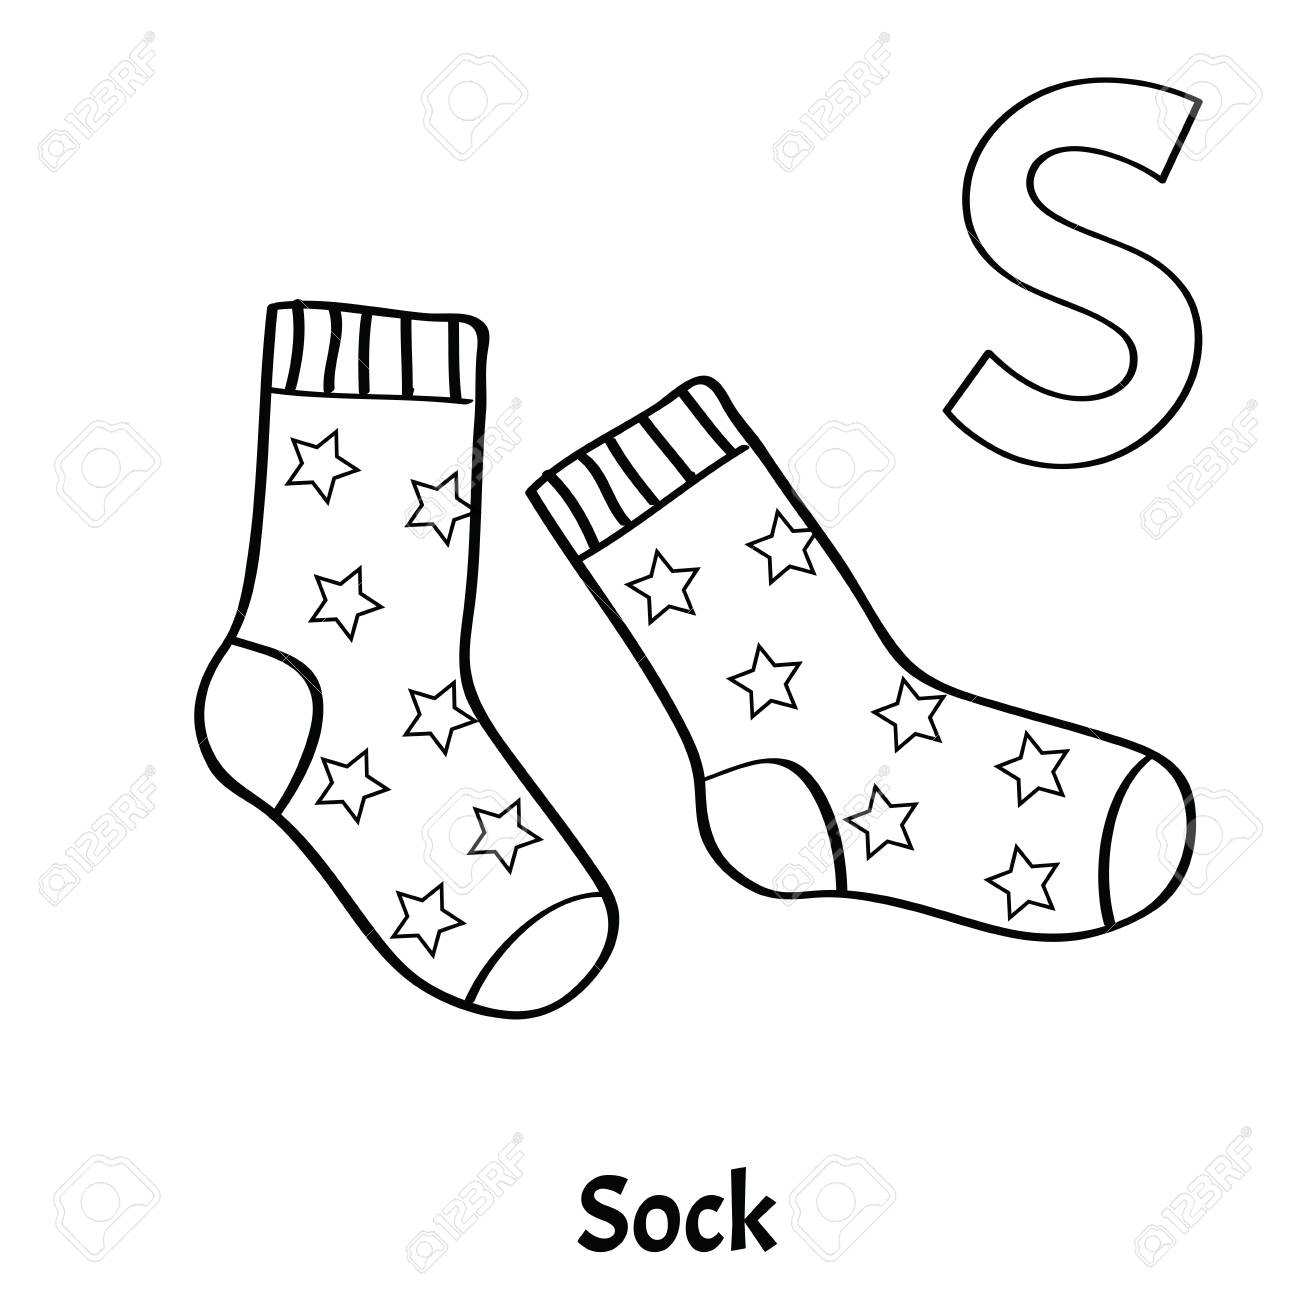 Coloring Book : Vector Alphabet Letter S Coloring Page Sock ...